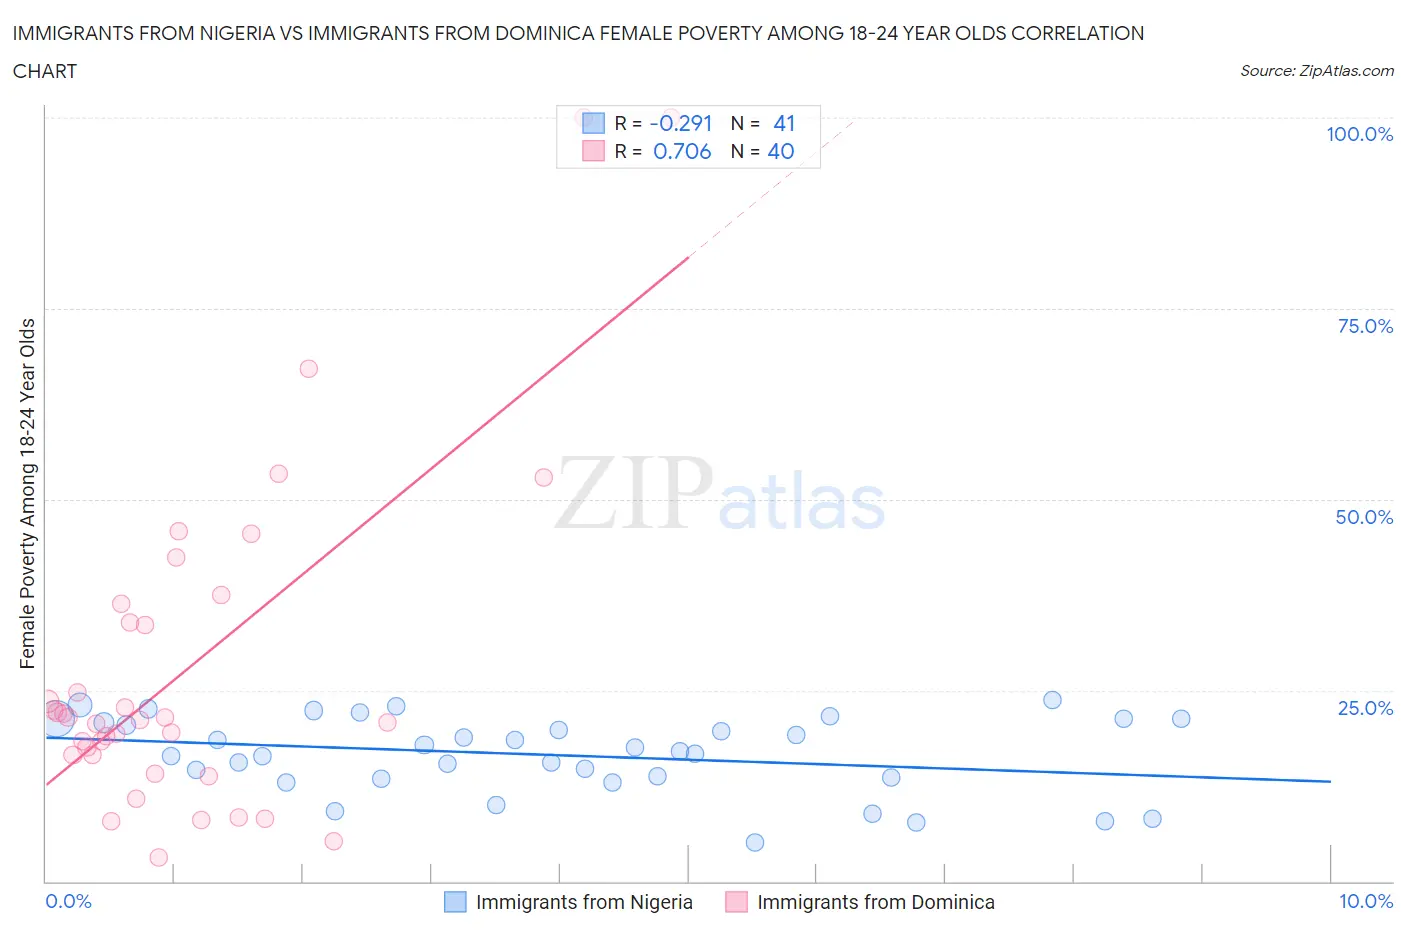 Immigrants from Nigeria vs Immigrants from Dominica Female Poverty Among 18-24 Year Olds